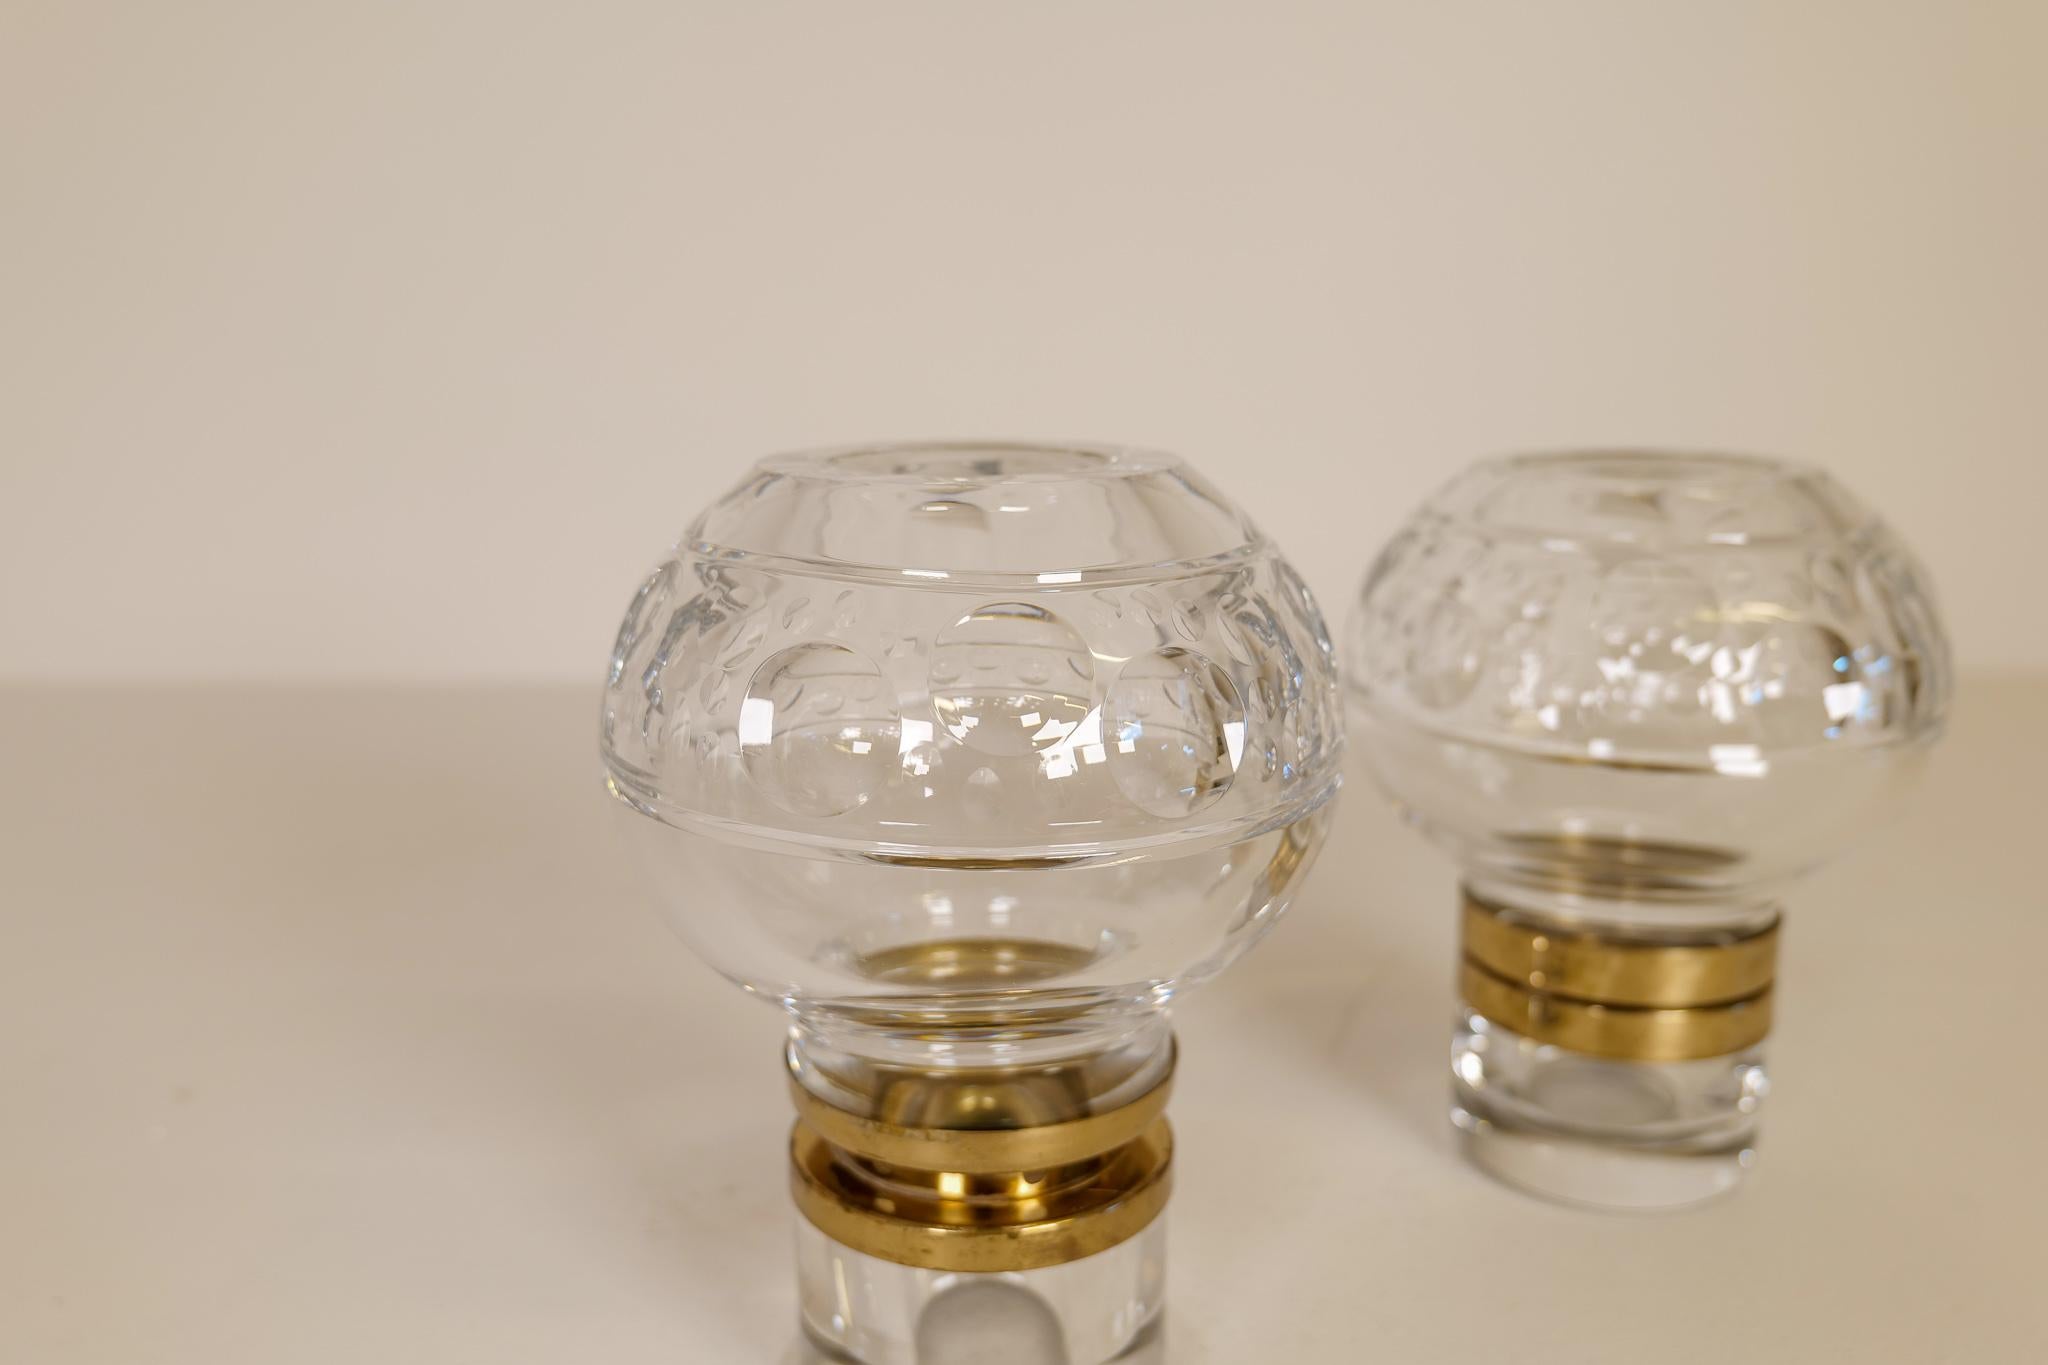 Scandinavian Modern Pair of Heavy Clear Crystal Candle Holders Orrefors Sweden For Sale 1